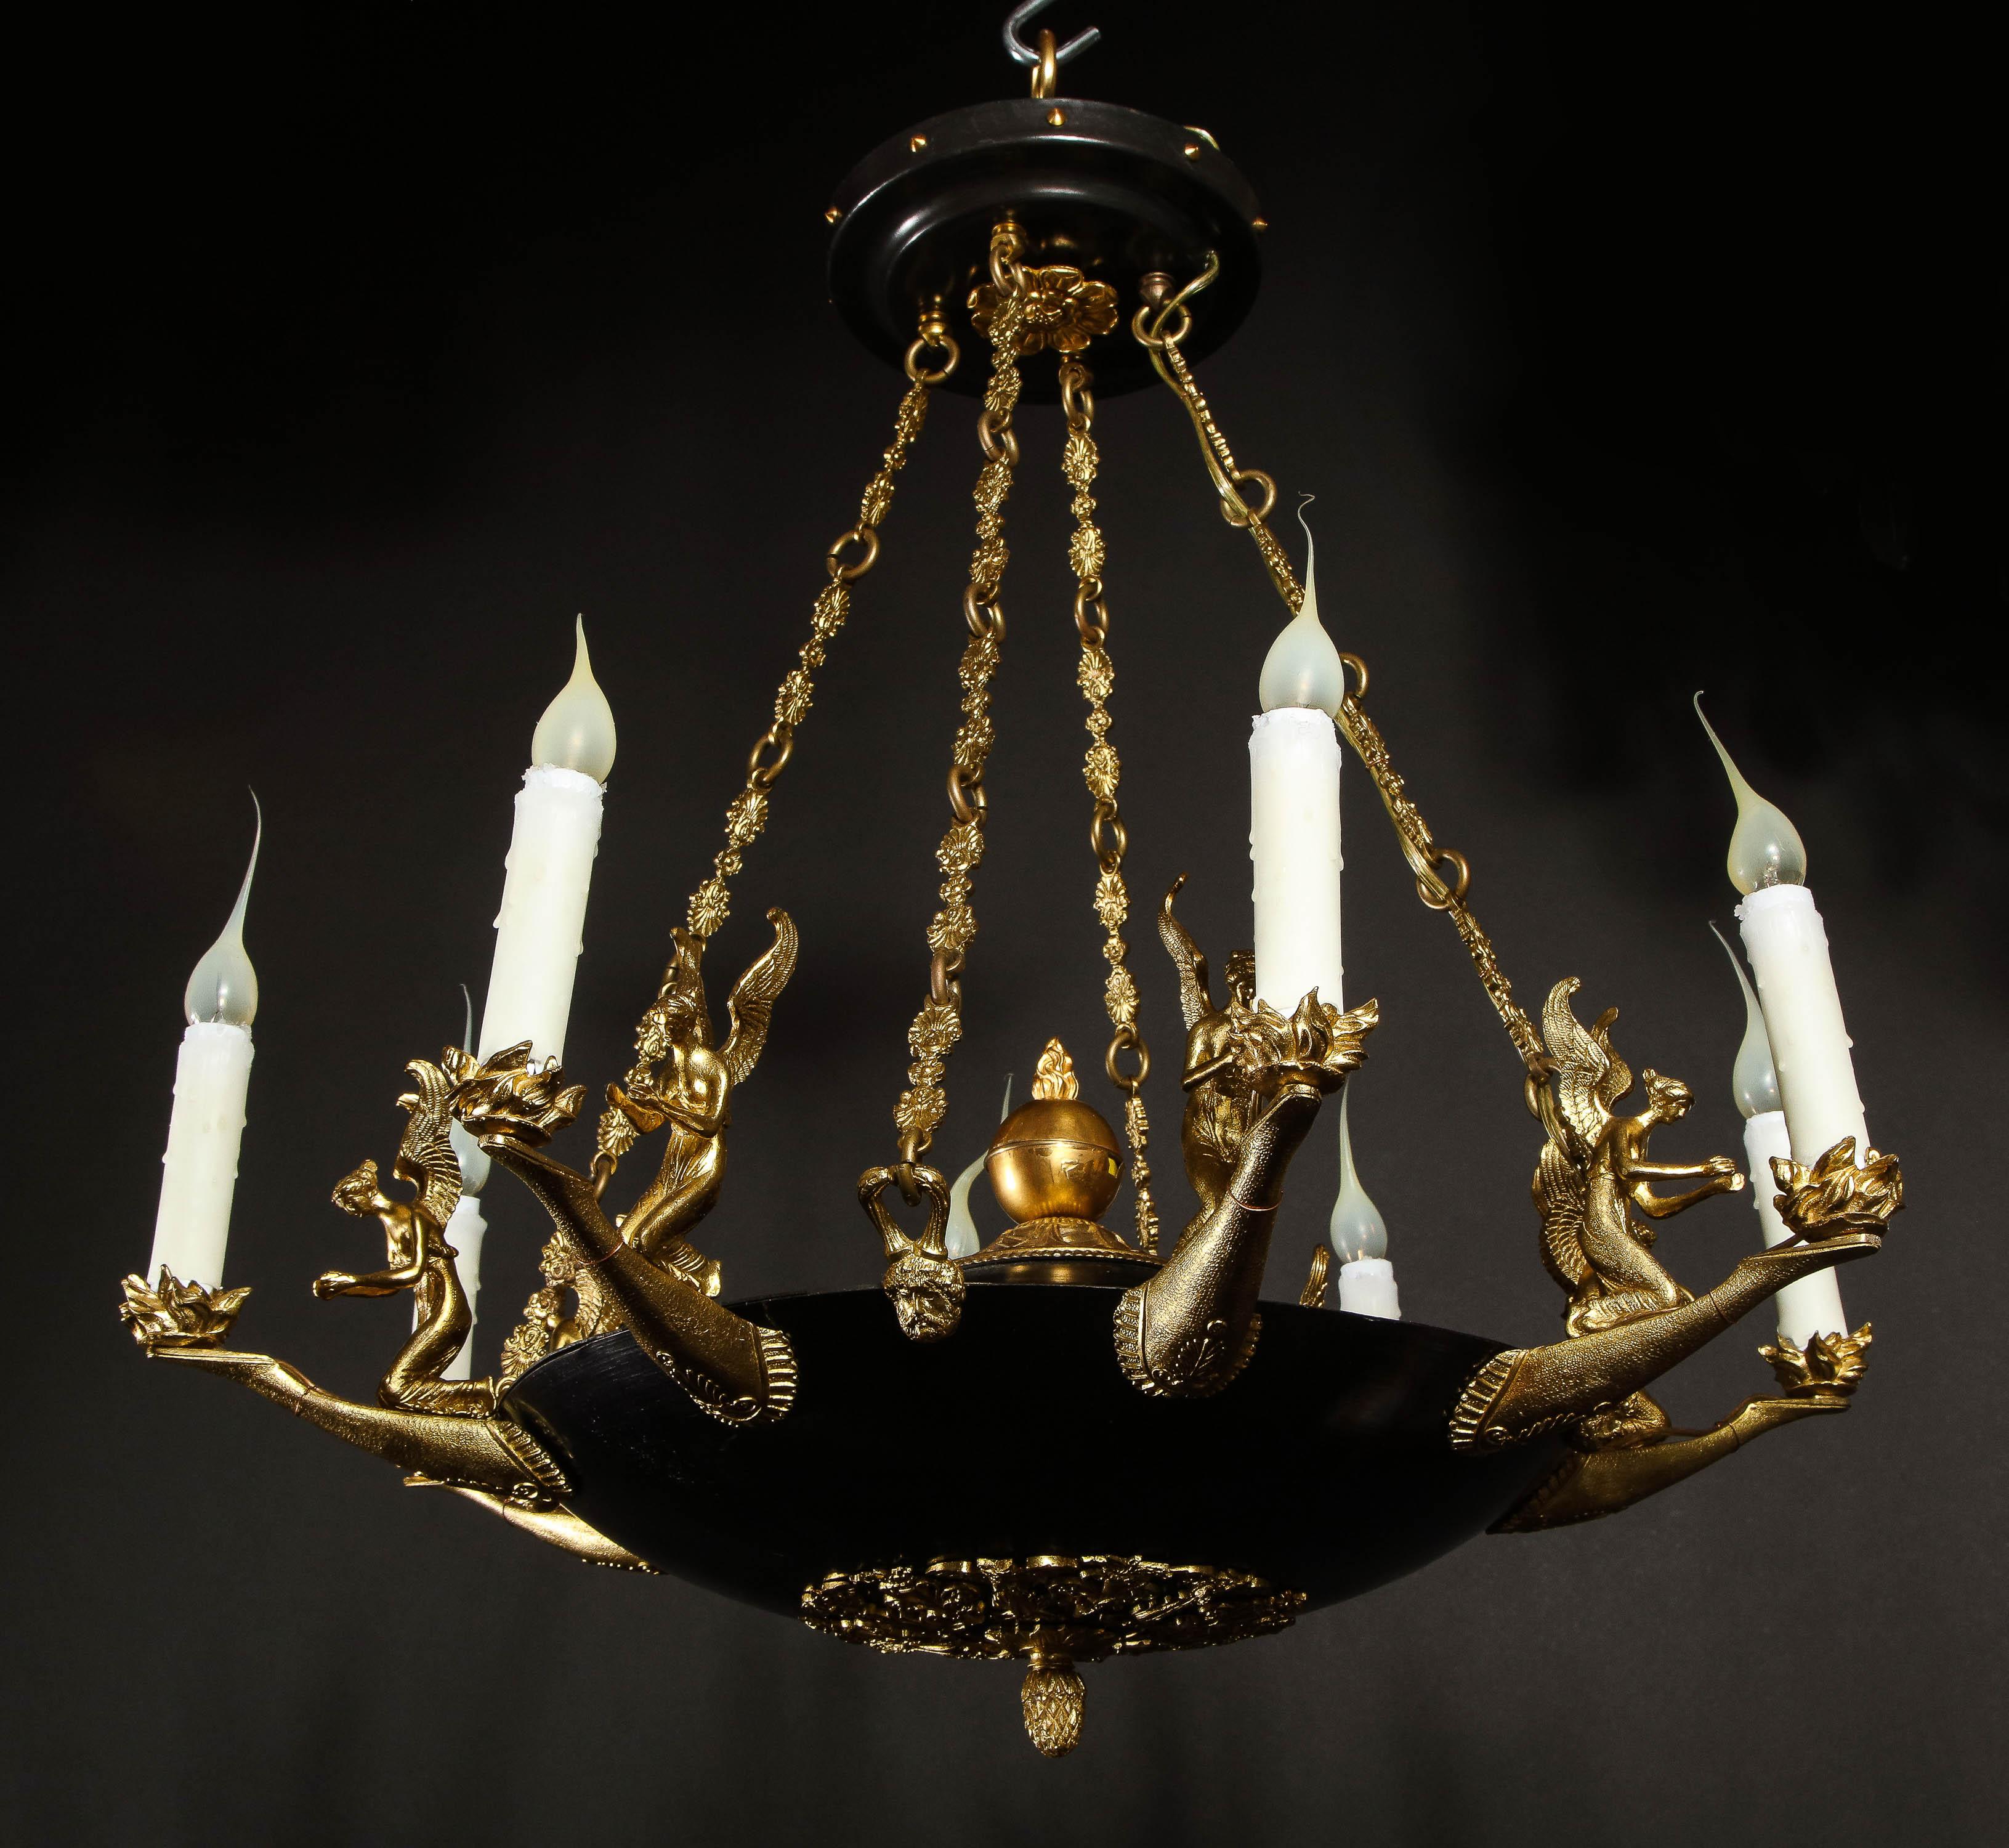 Pair of Antique French Empire Style Figural Gilt & Patina Bronze Chandeliers For Sale 11